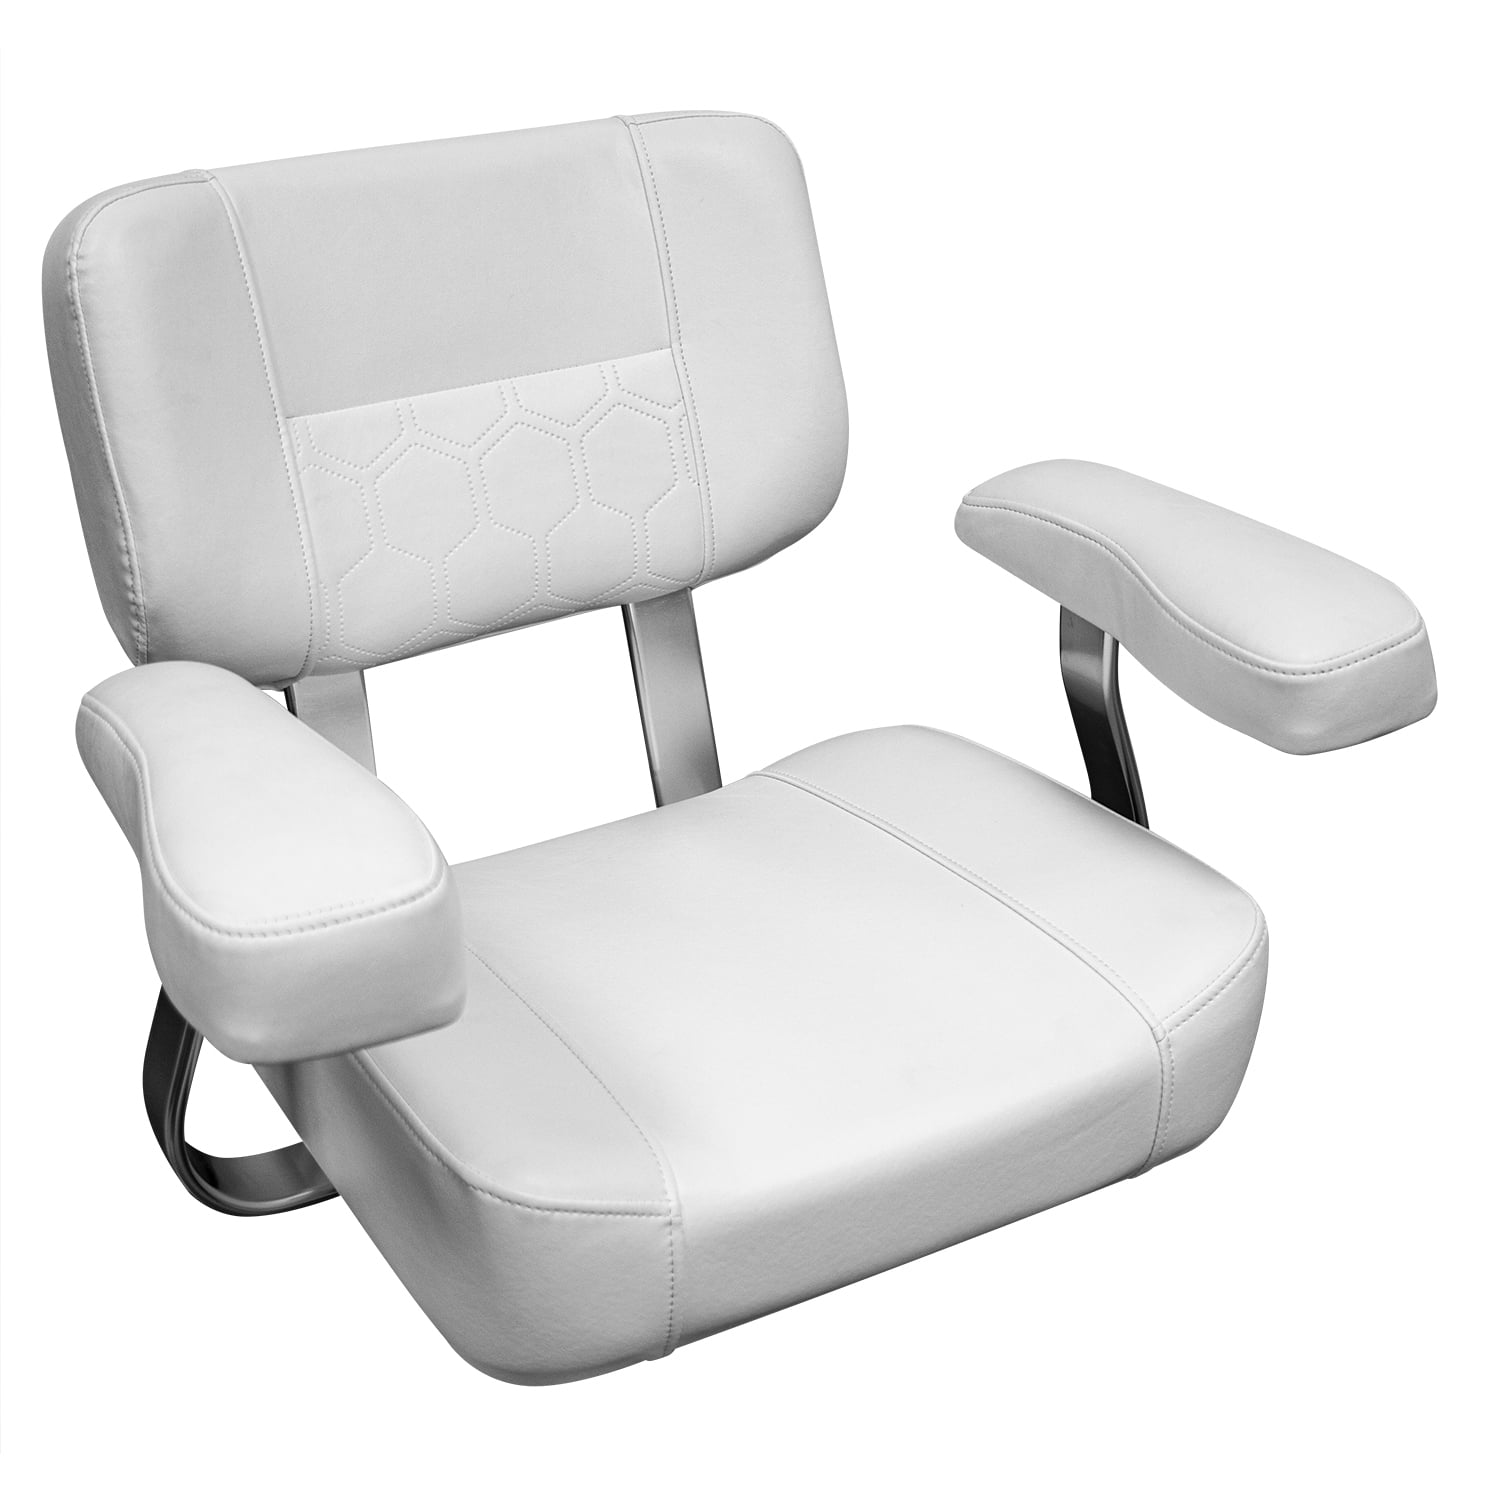 Wise 3321-784 Deluxe Offshore Helm Chair with Oversized Arm Rests